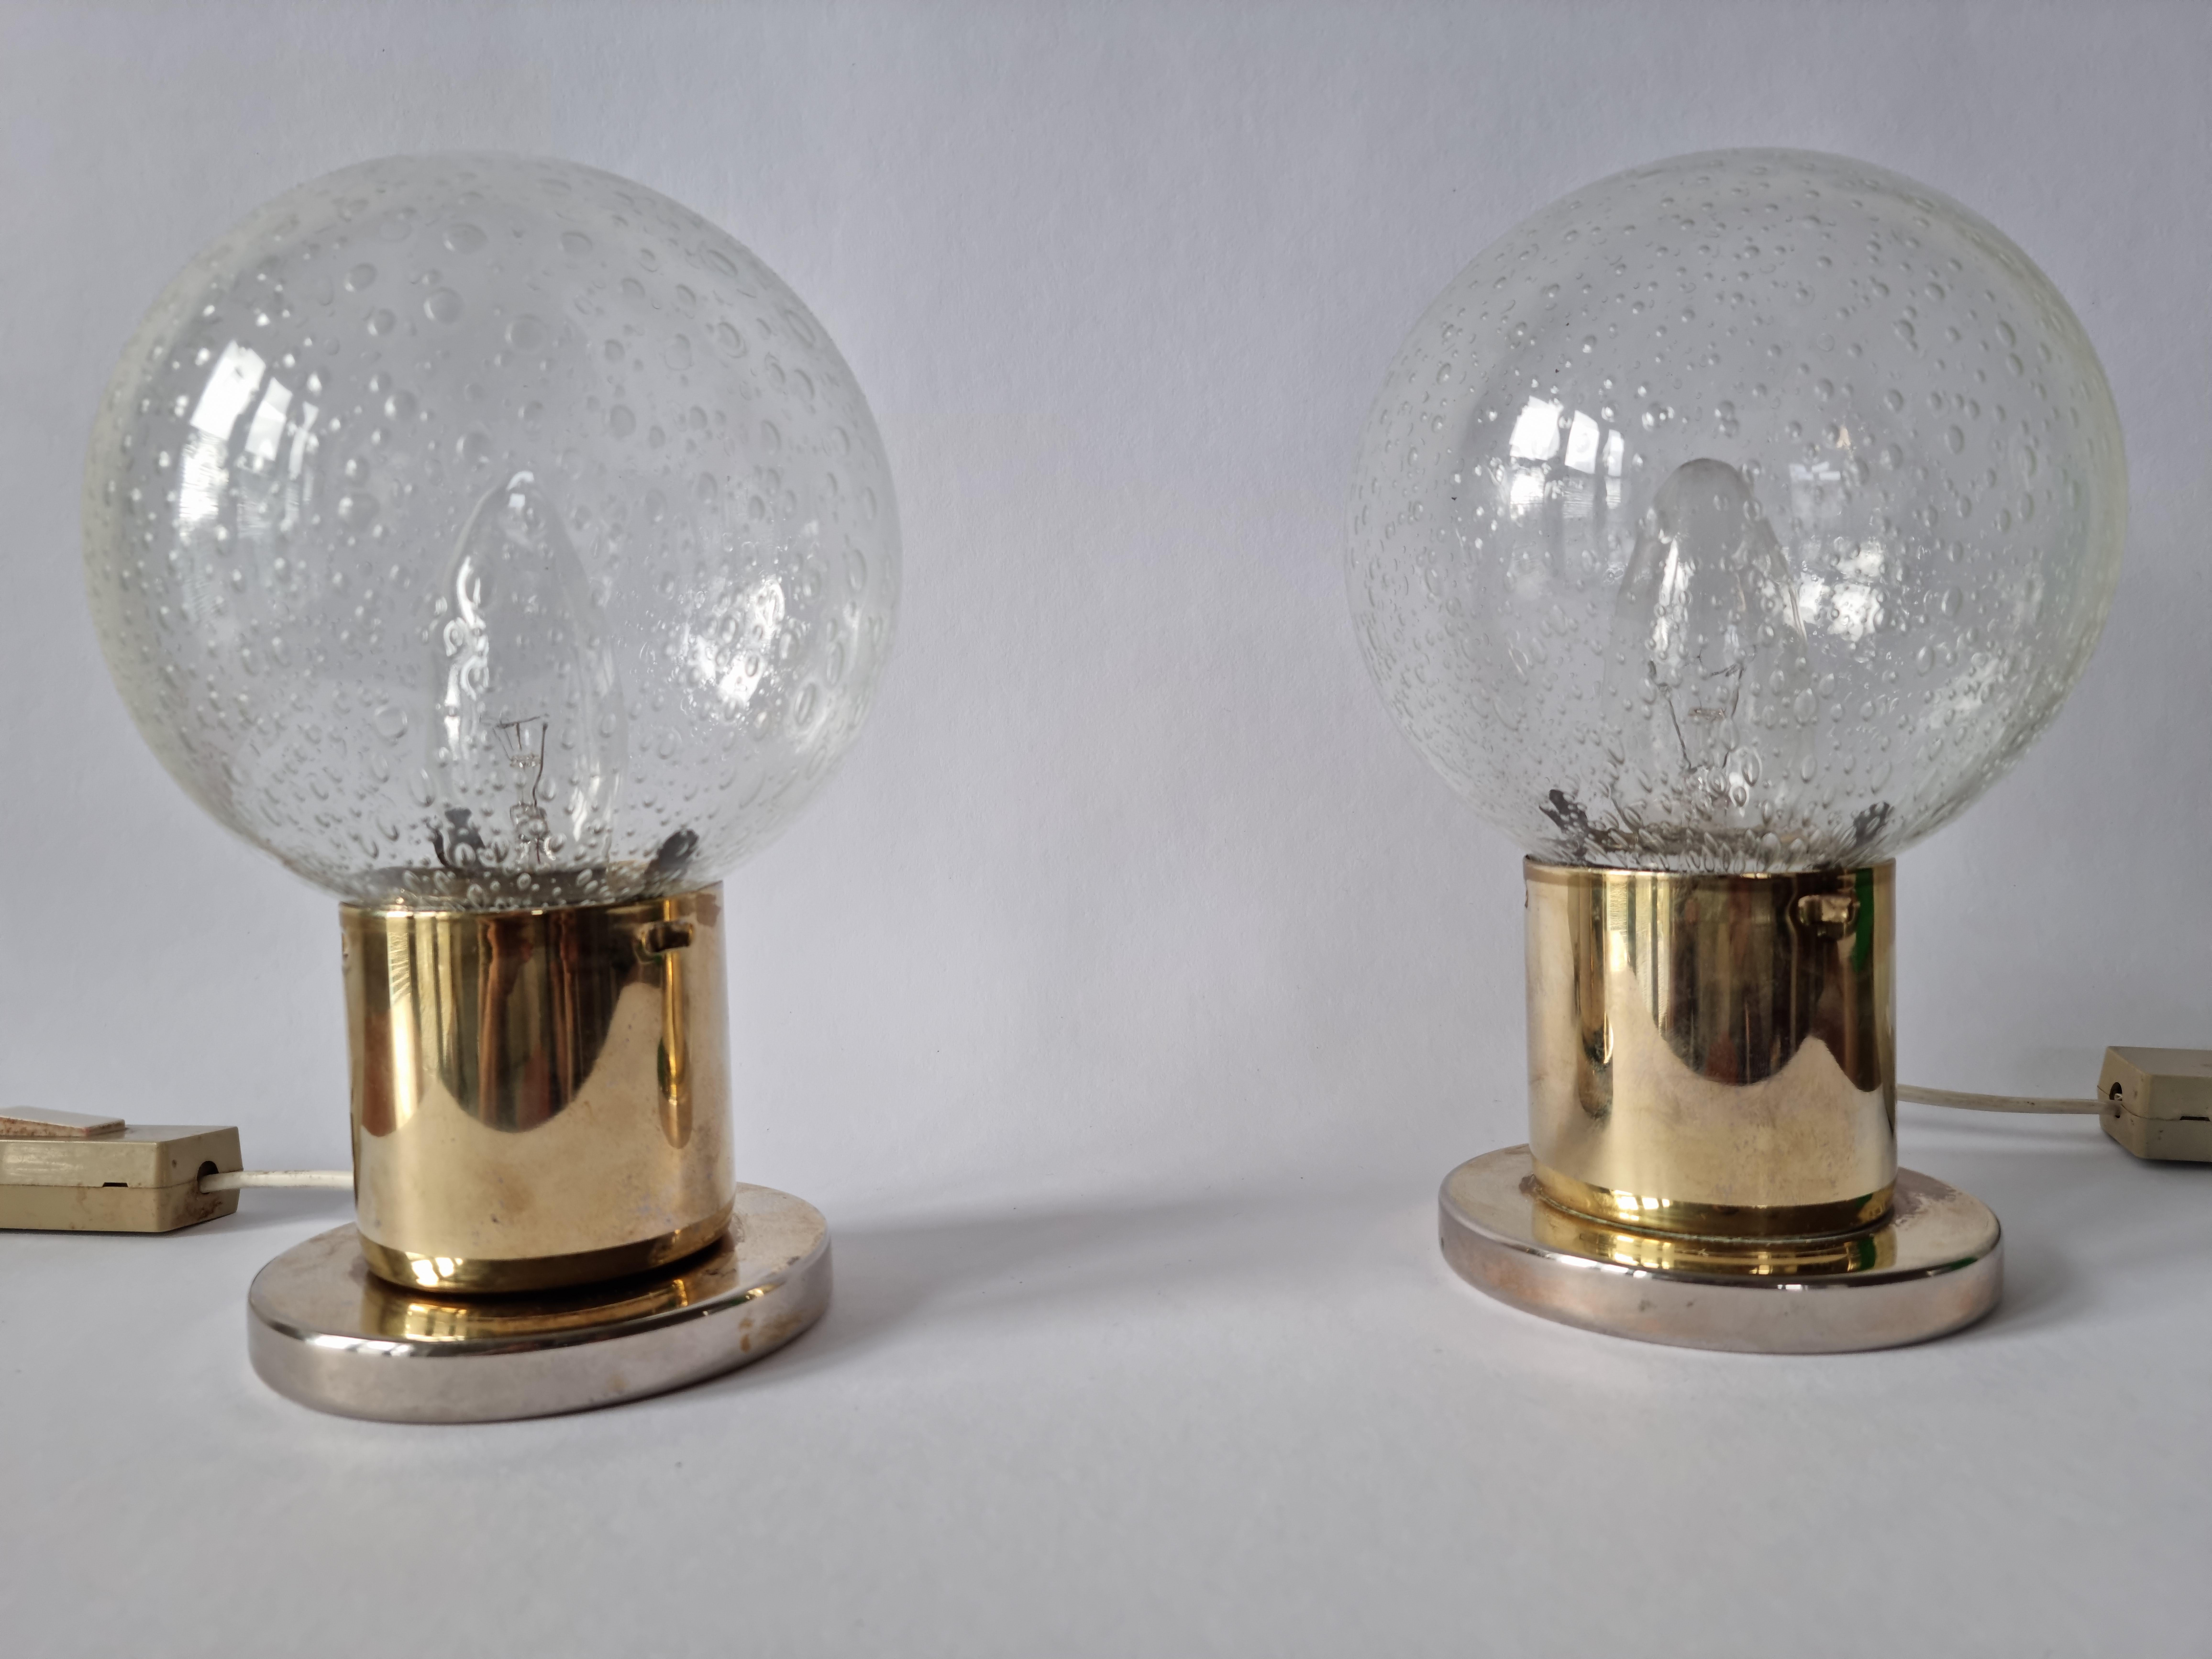 Pair of Midcentury Table Lamps Kamenicky Senov, 1970s For Sale 1